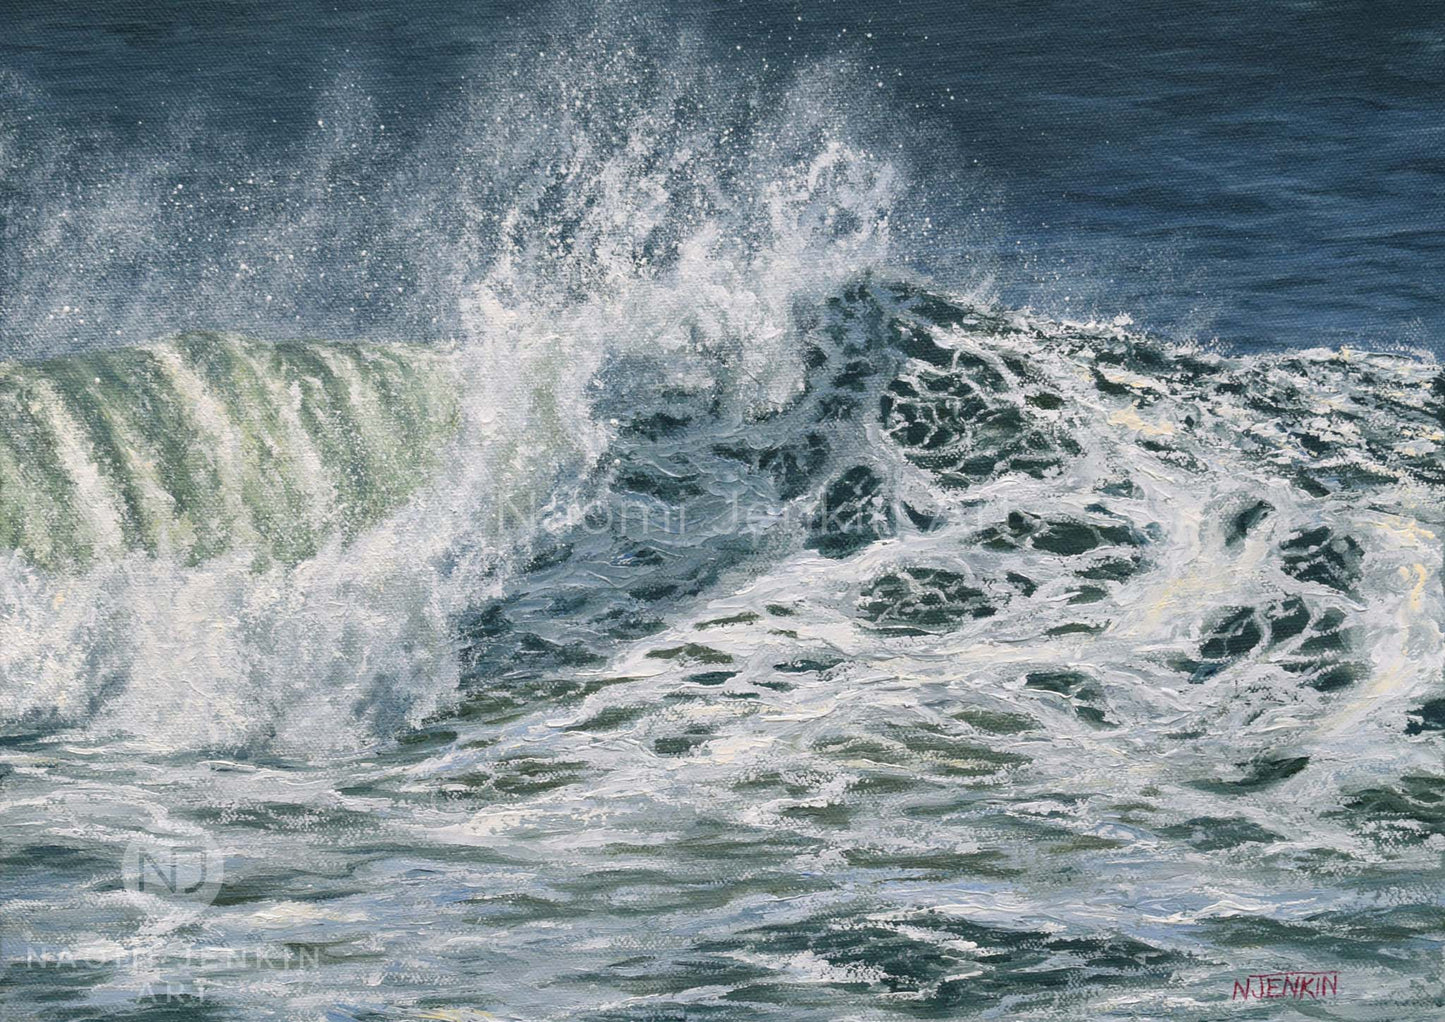 "Froth and Spray” – Seascape Art Prints